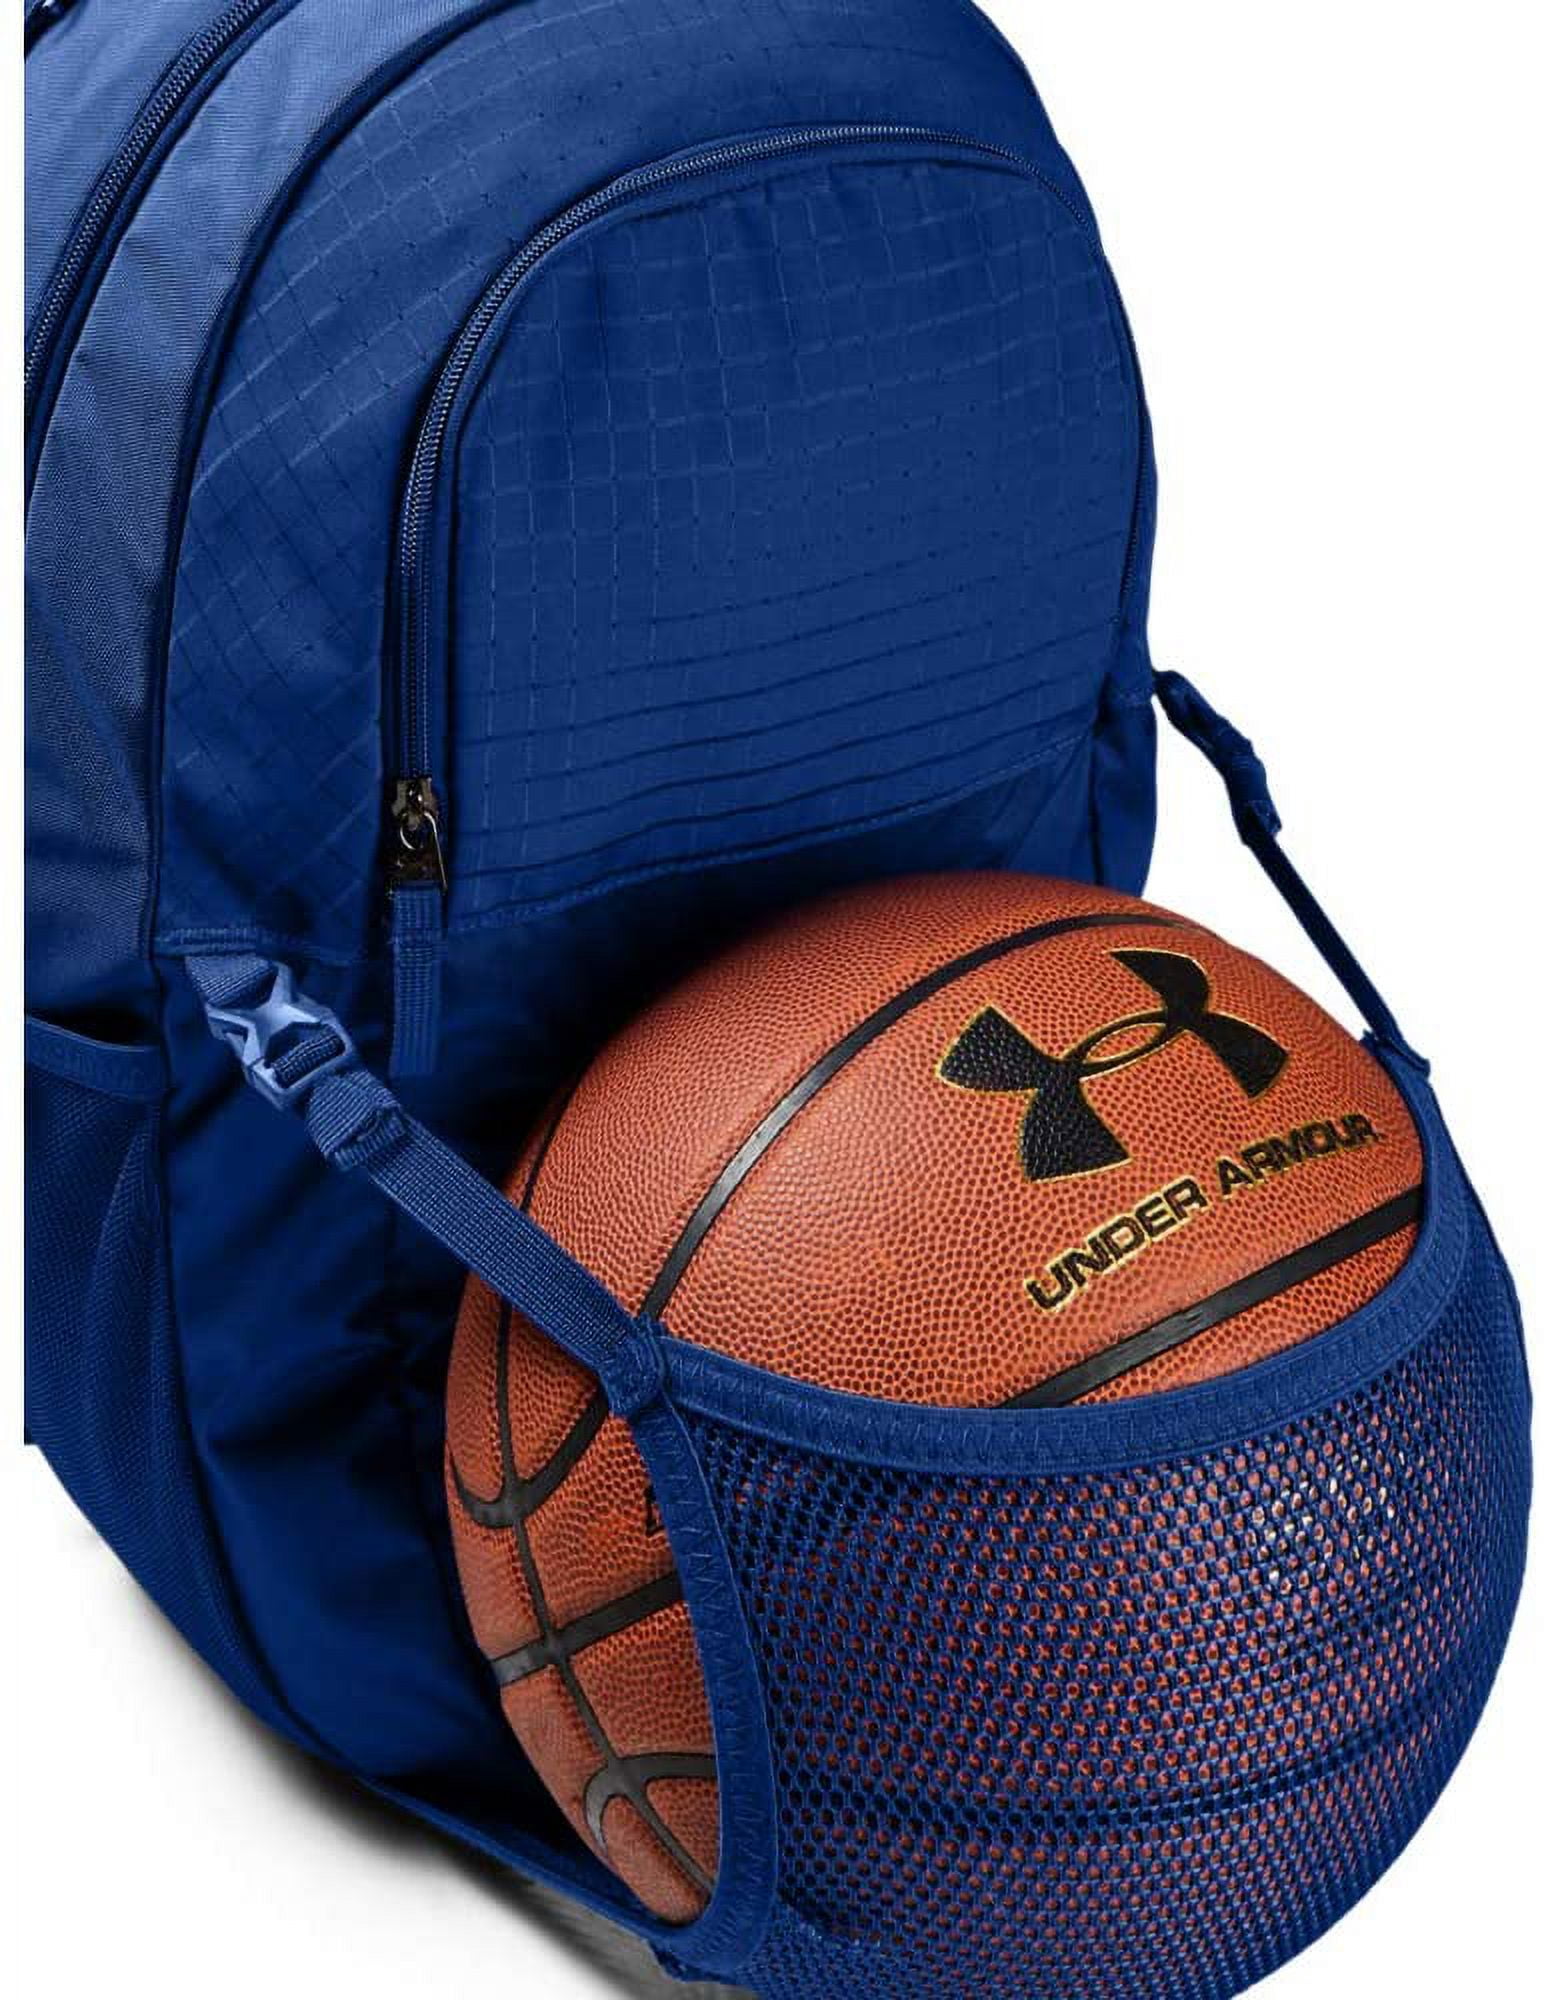 Under Armour All Sport Backpack 